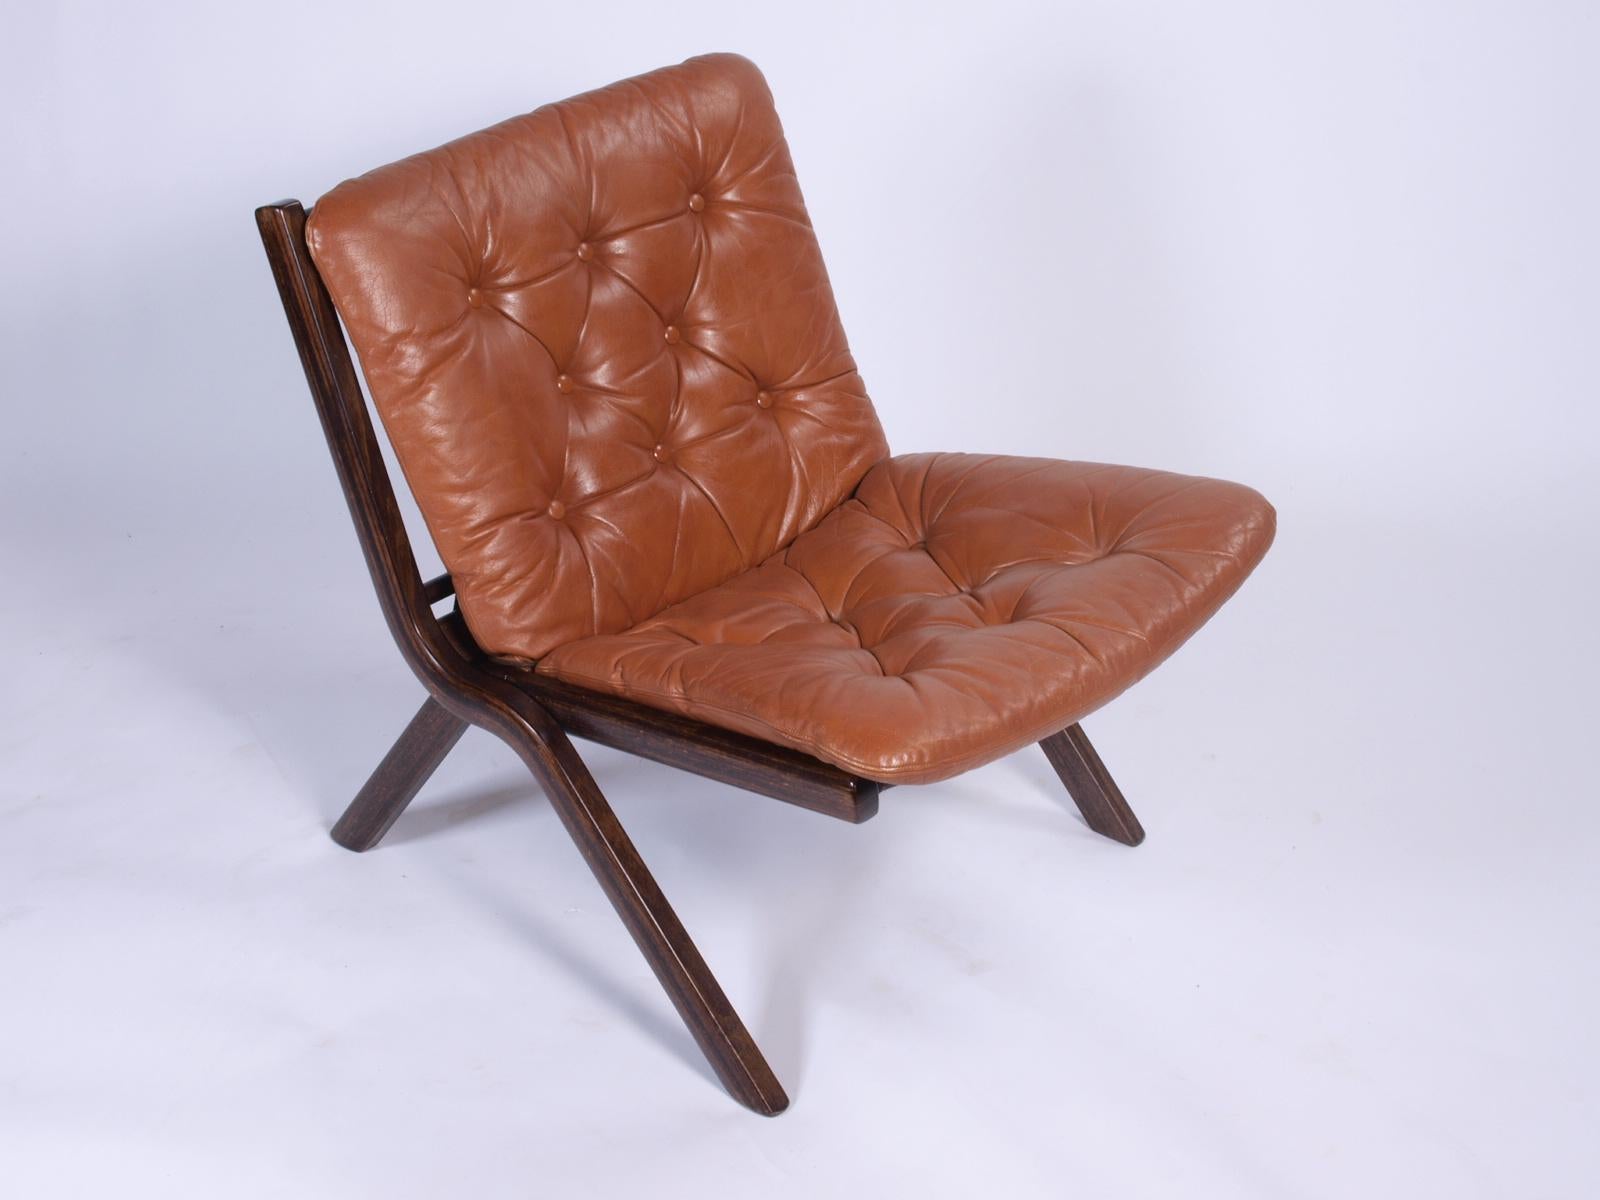 Leather Uno Folding Chair by Ekornes of Norway 1970's, set of 2